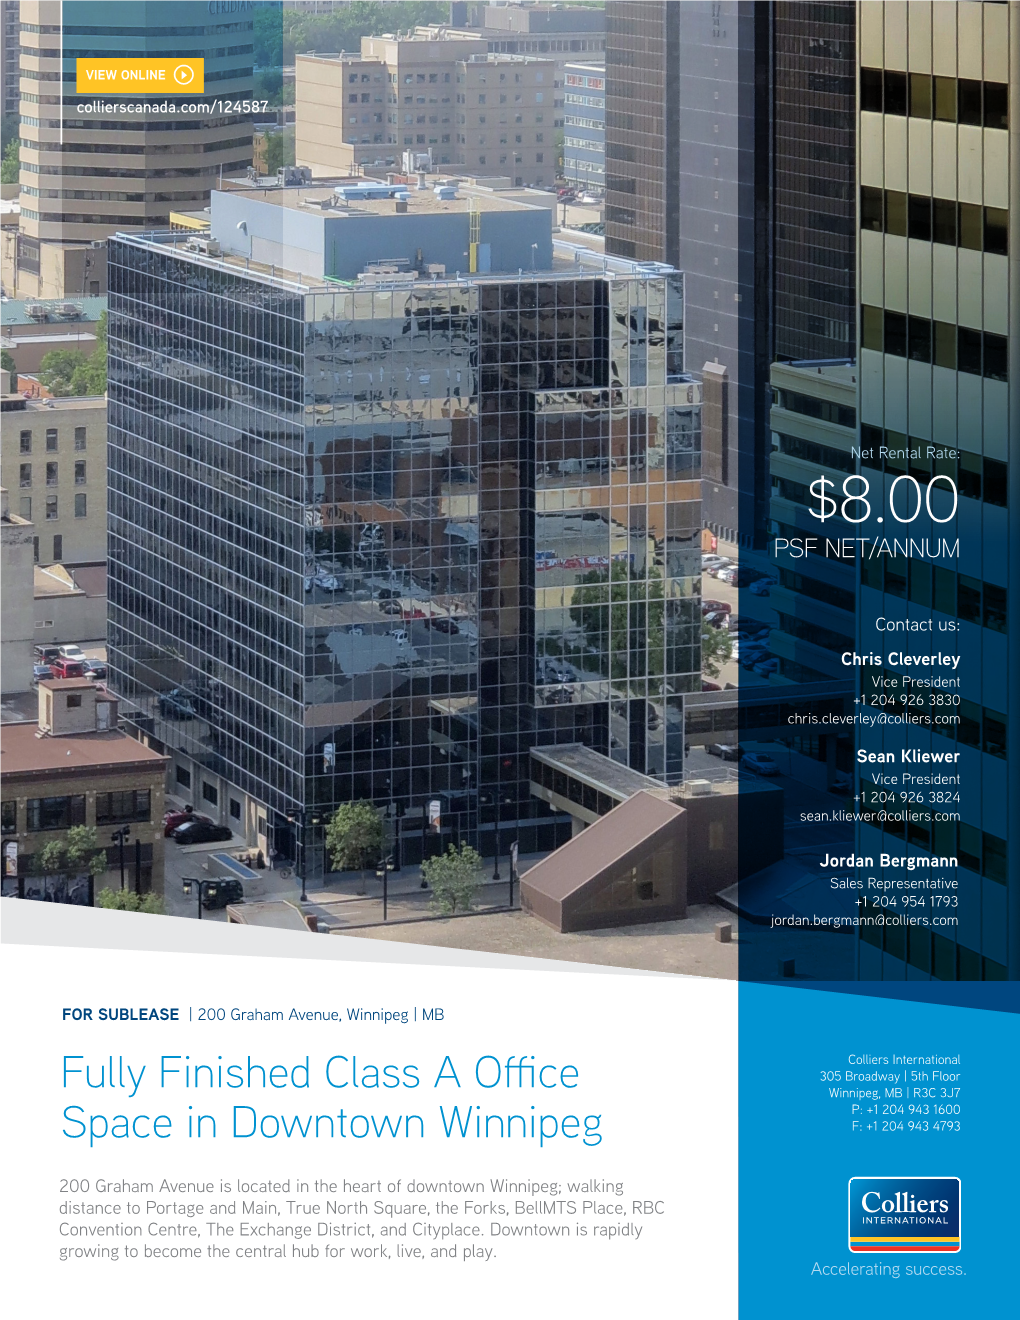 Fully Finished Class a Office Space in Downtown Winnipeg